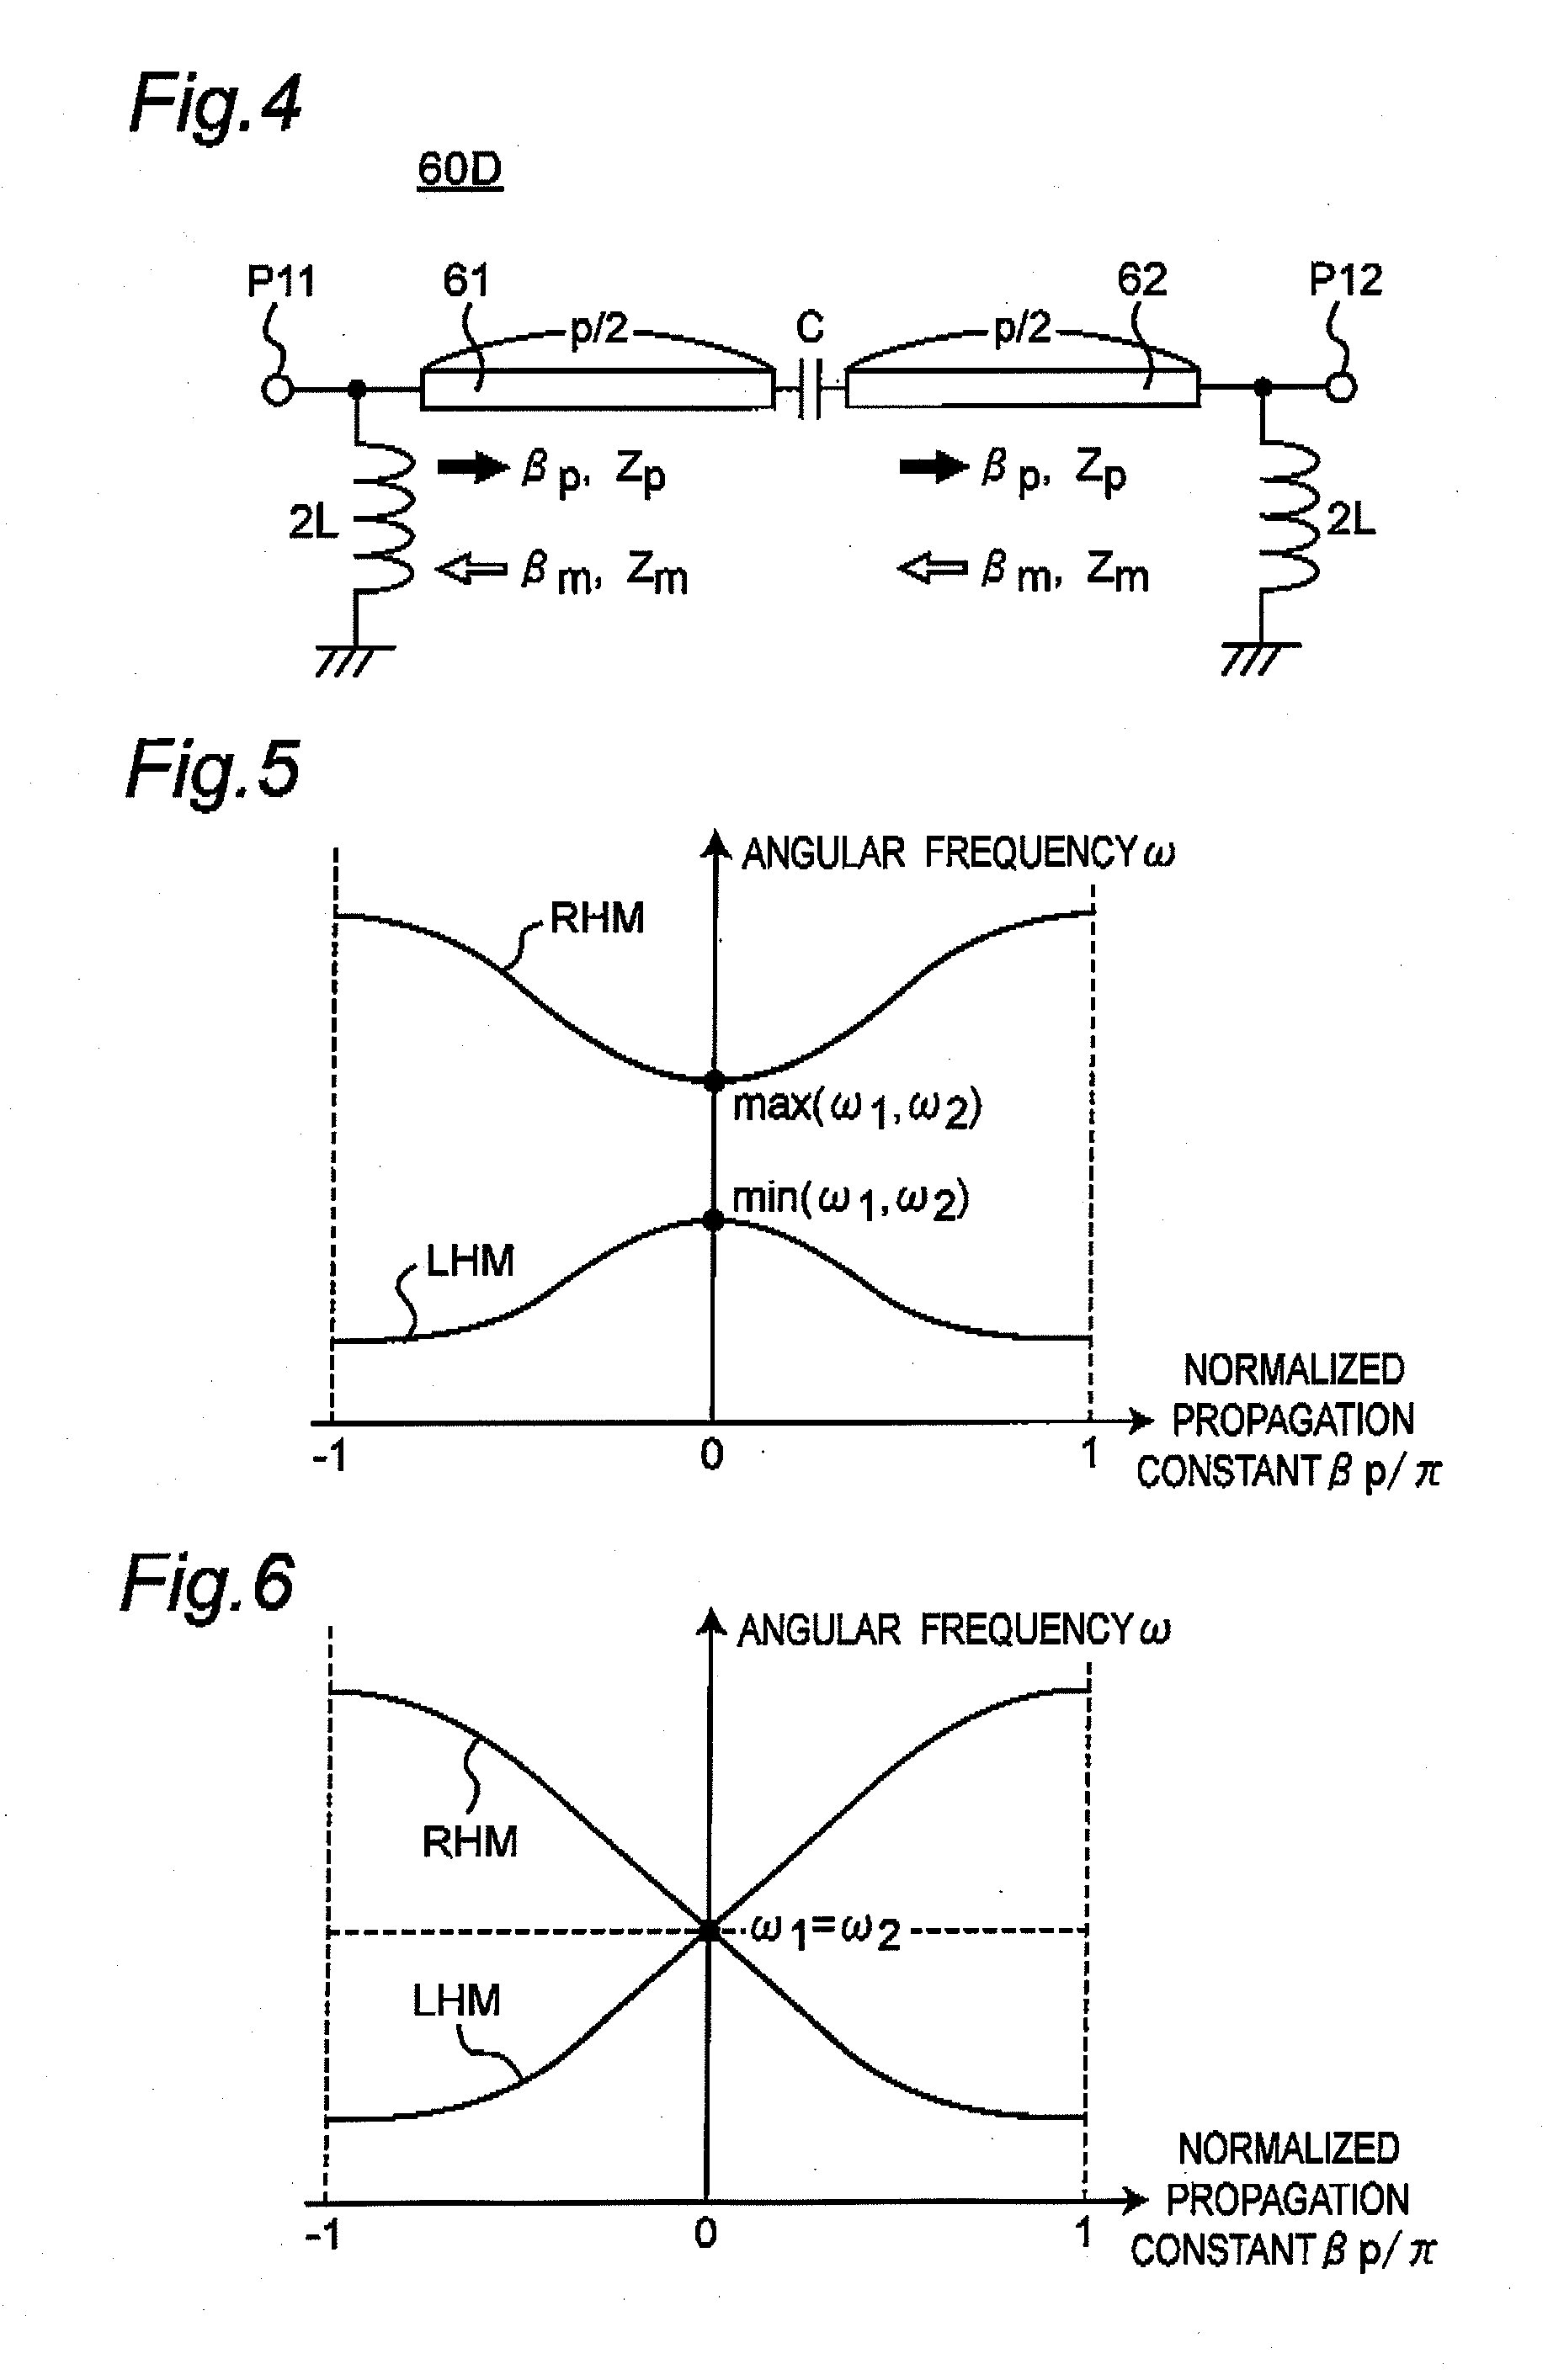 Transmission line microwave apparatus including at least one non-reciprocal transmission line part between two parts